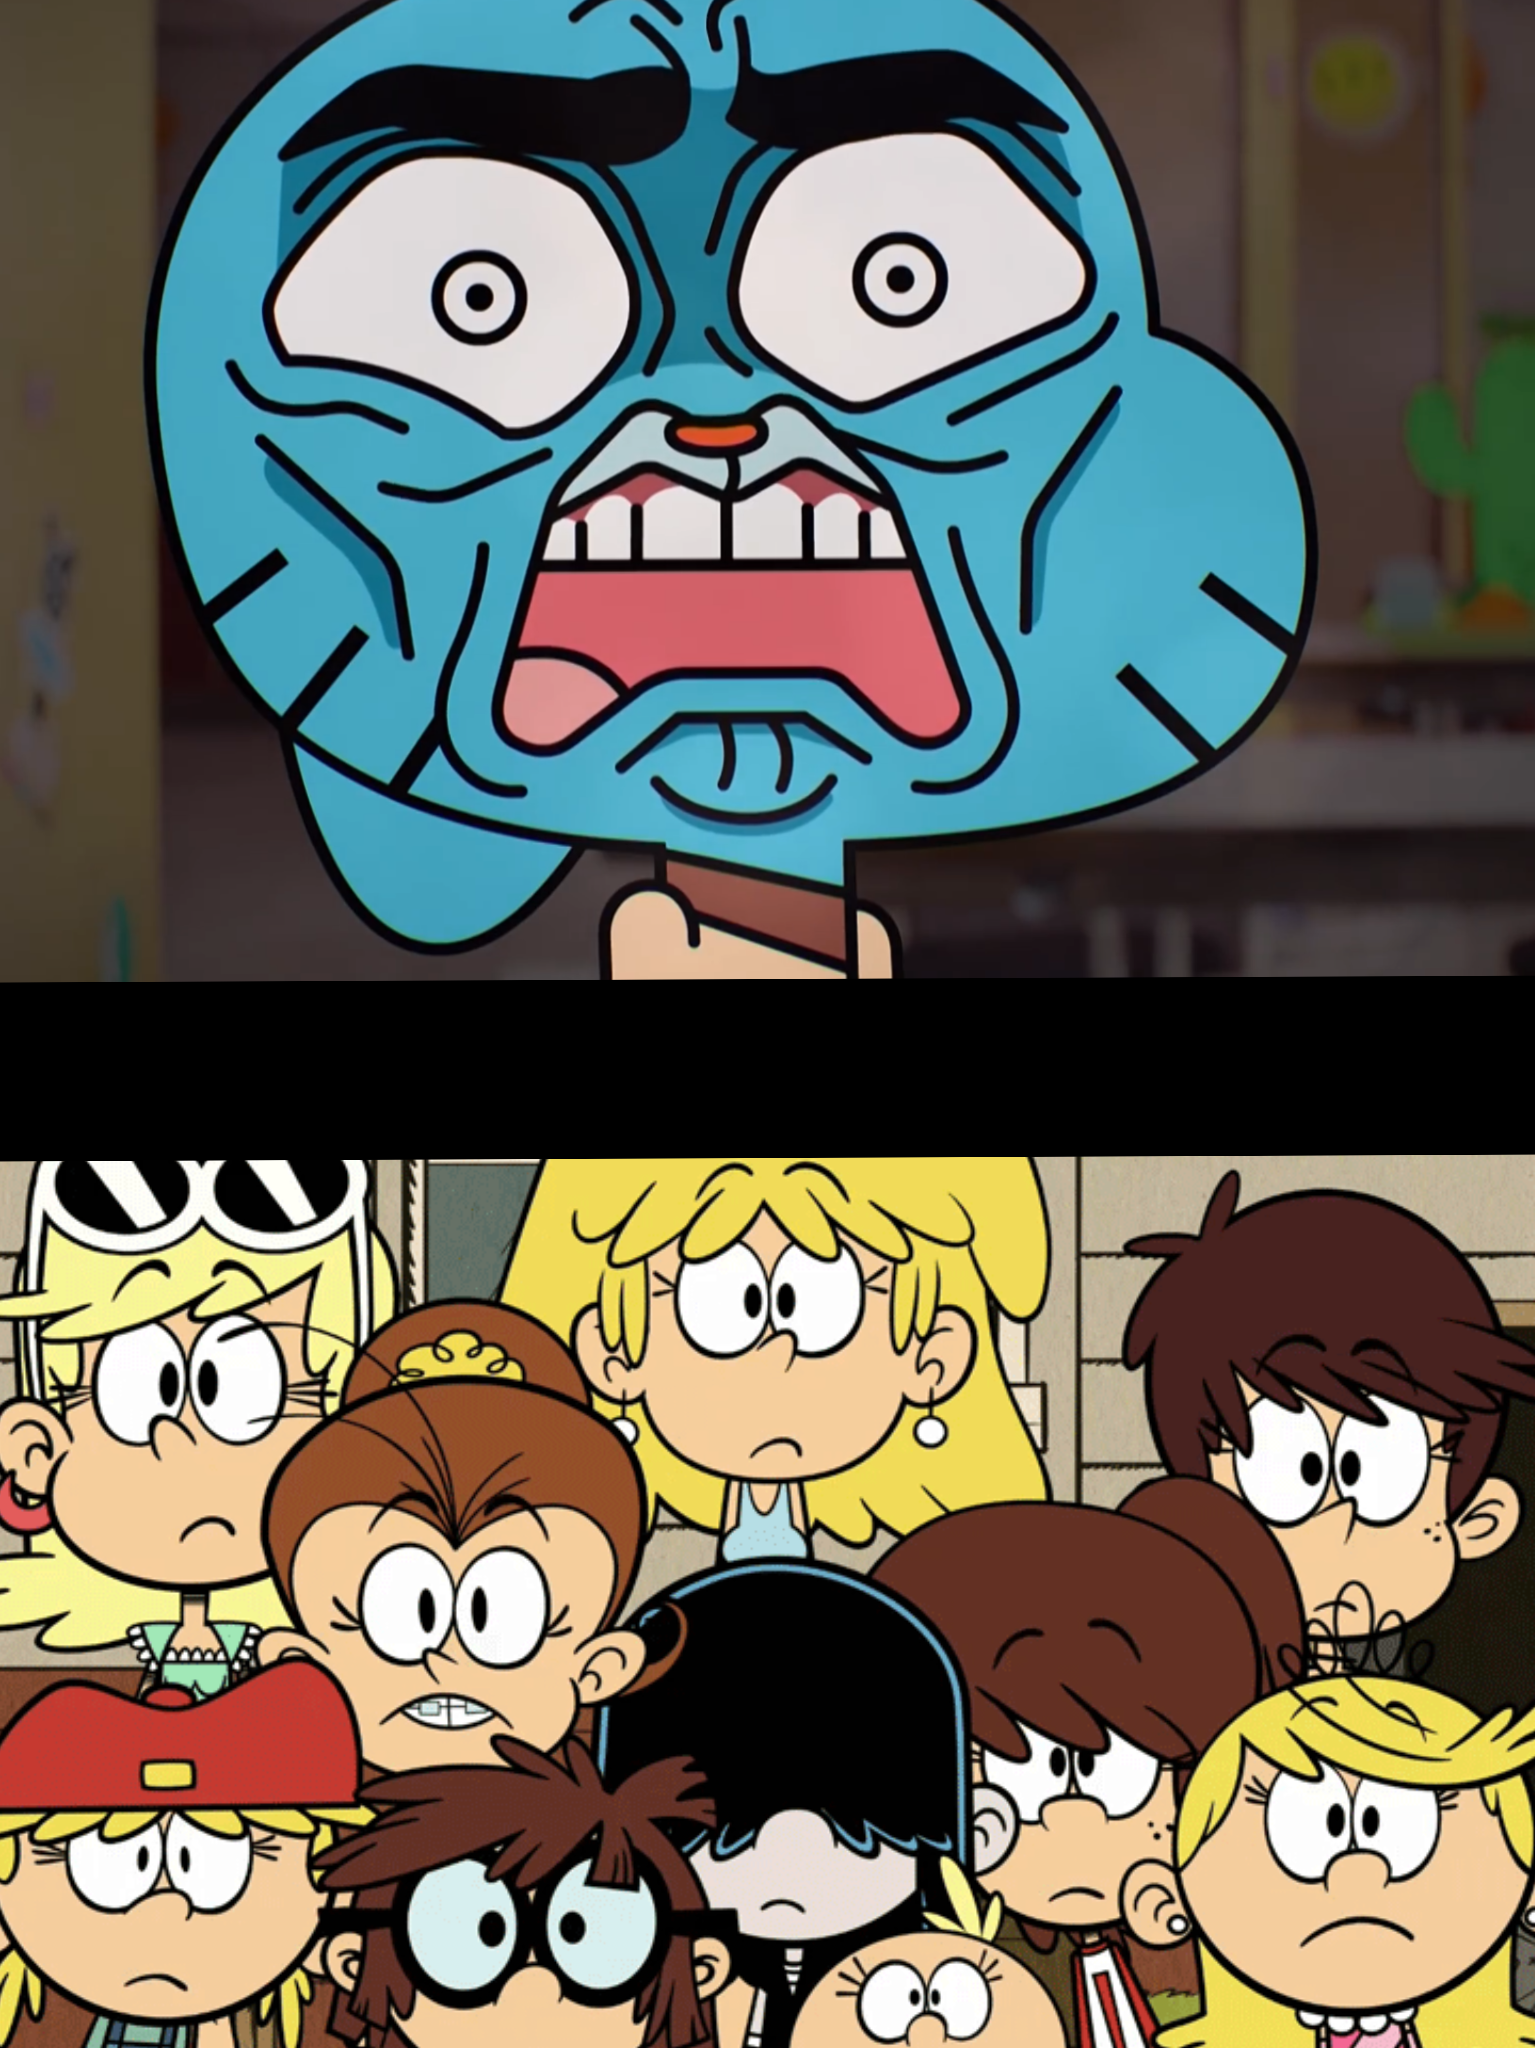 Loud Sisters Confused with Gumball Weird Face by Jamesdean1987 on DeviantArt